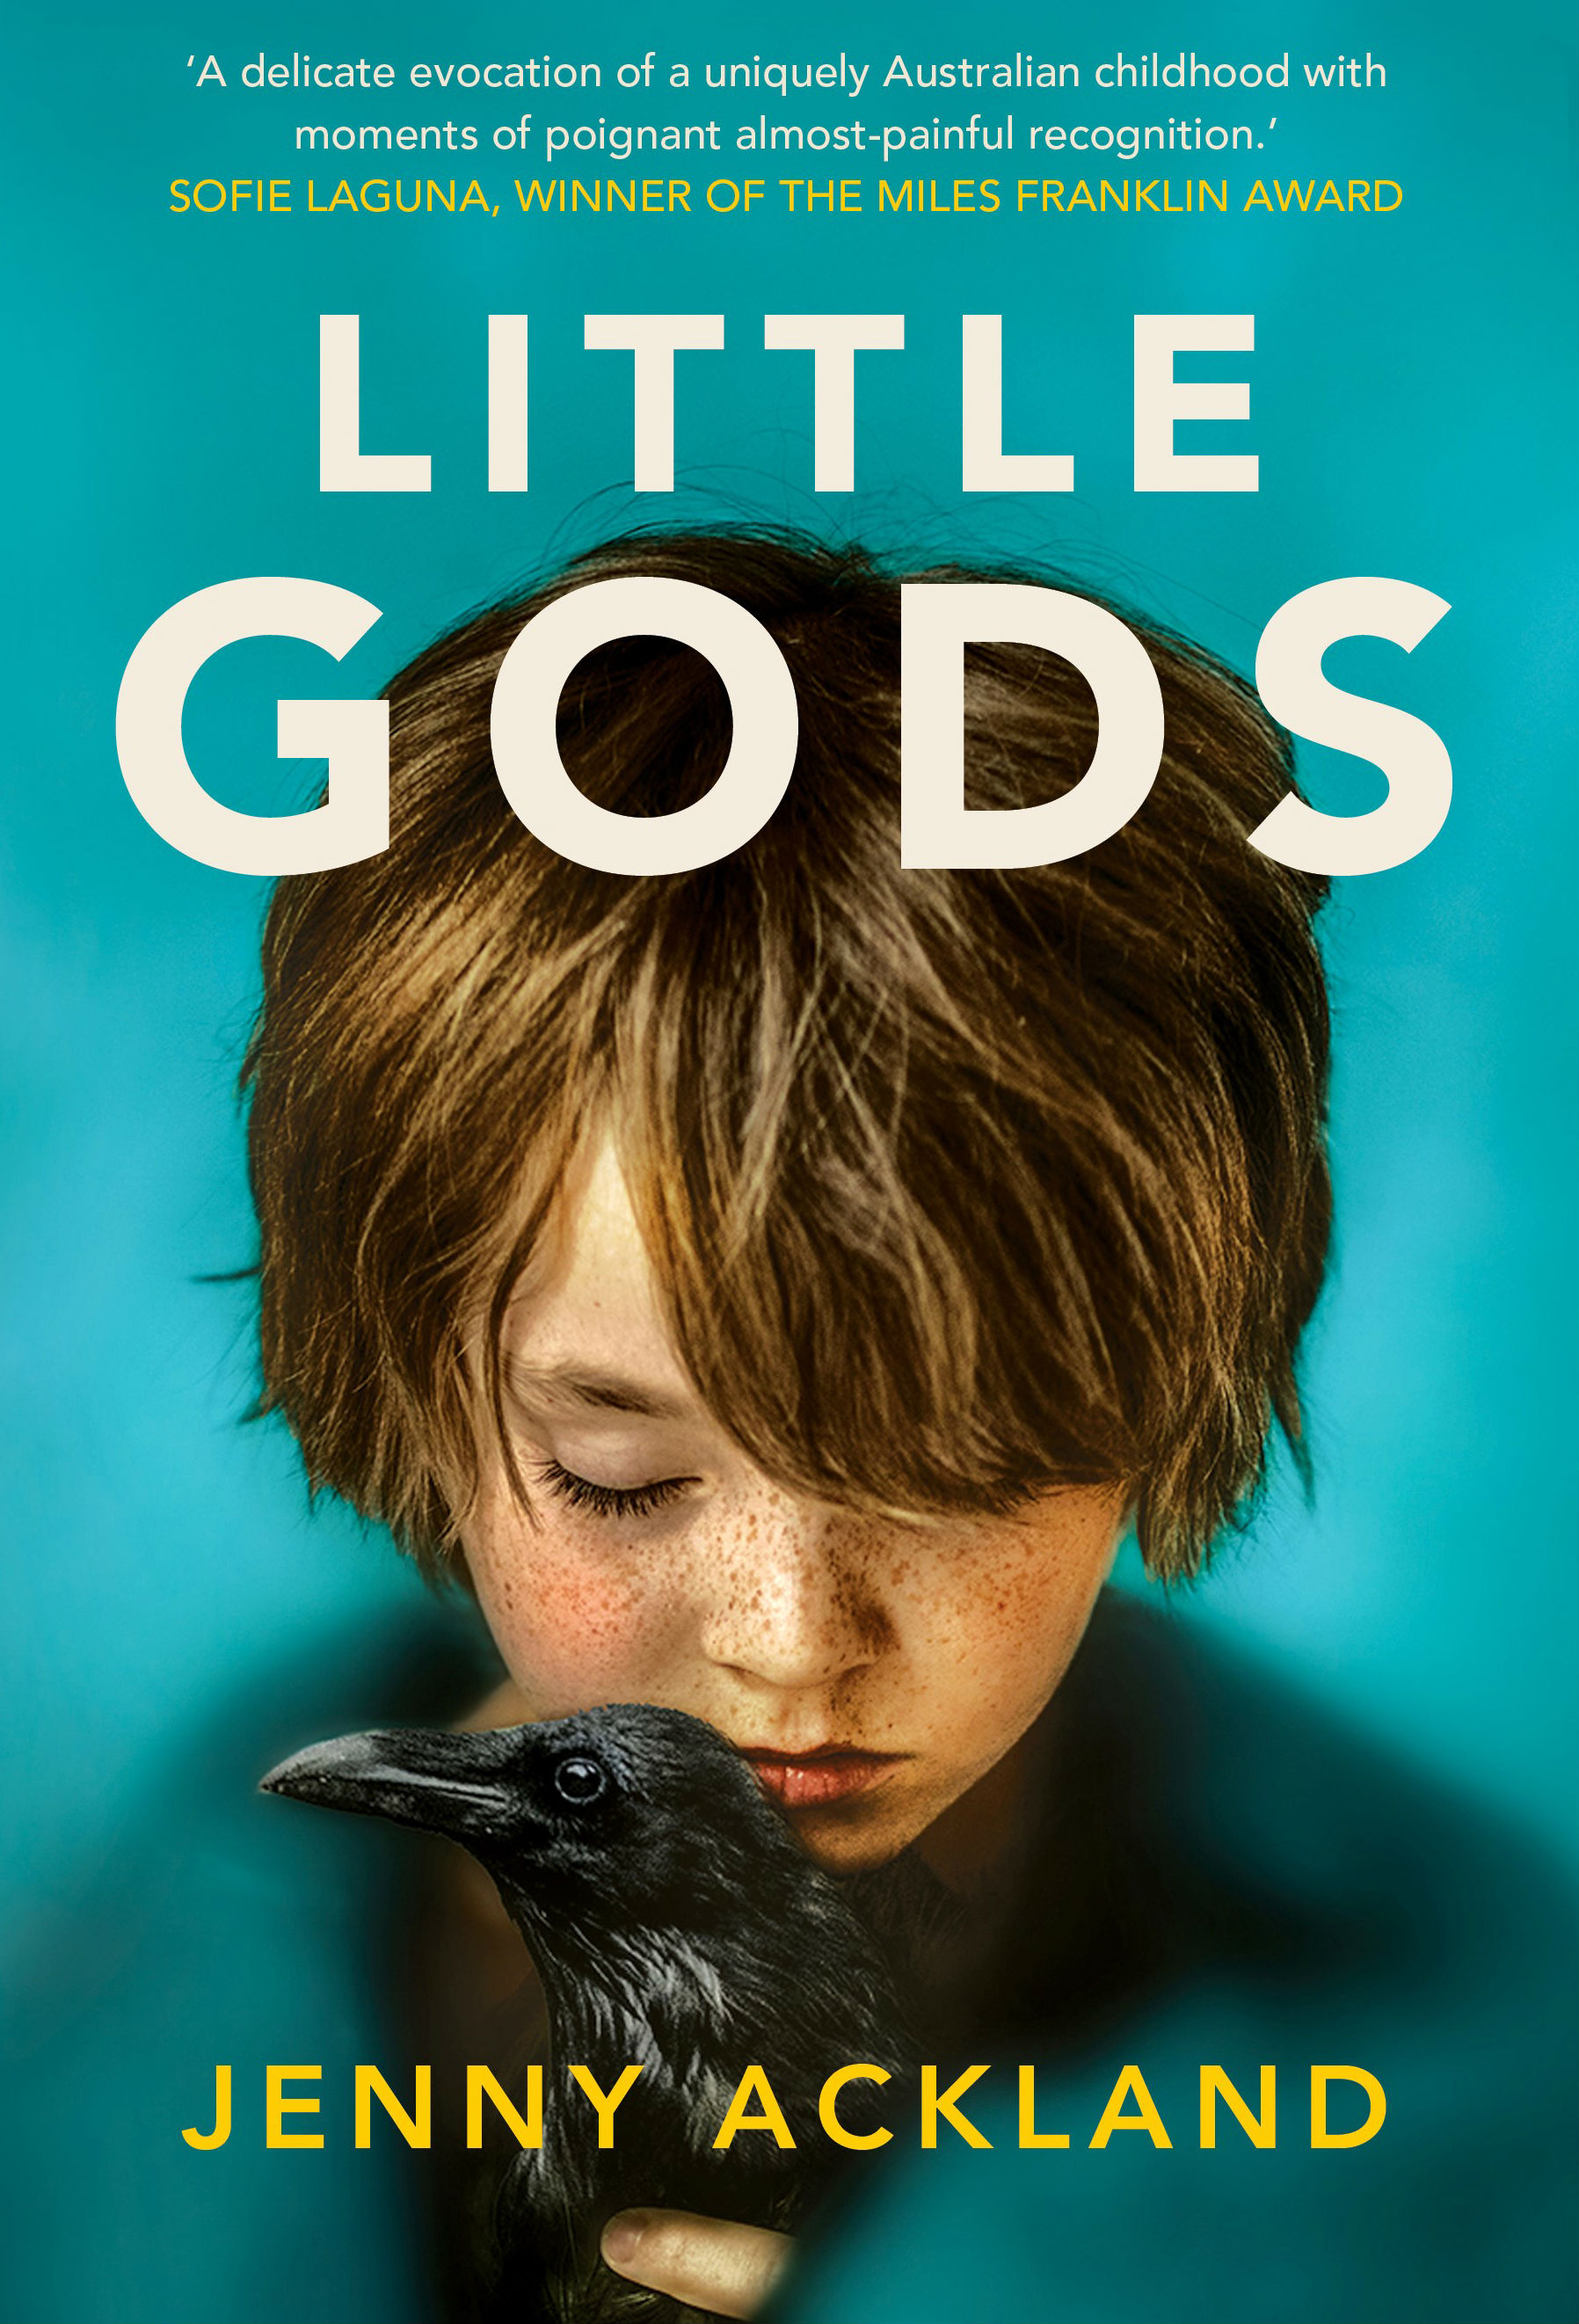 A book cover showing a small child's face bent over a crow that the child is holding in their hands.